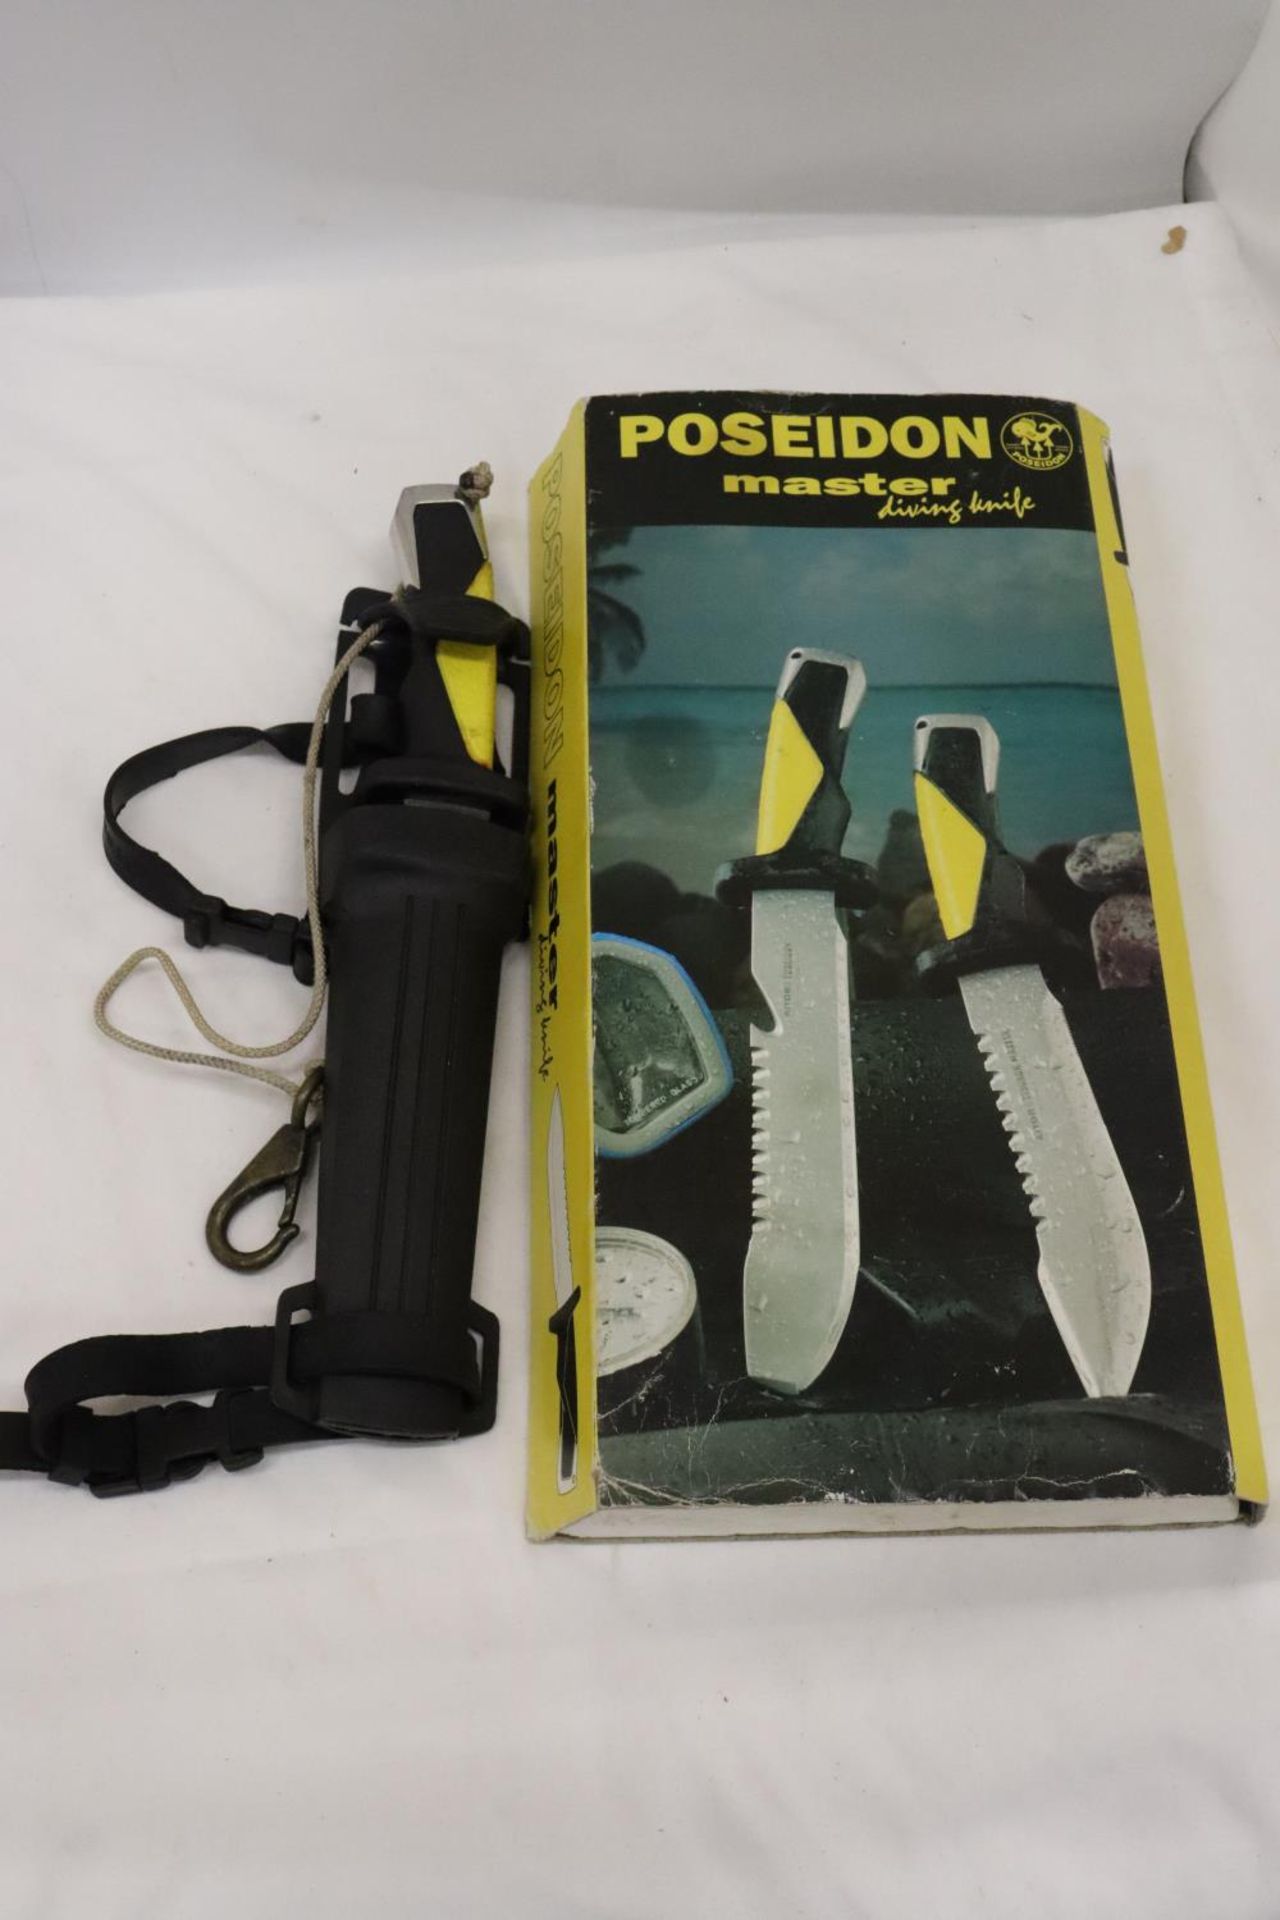 A POSEIDON MASTER DIVING KNIFE IN BOX